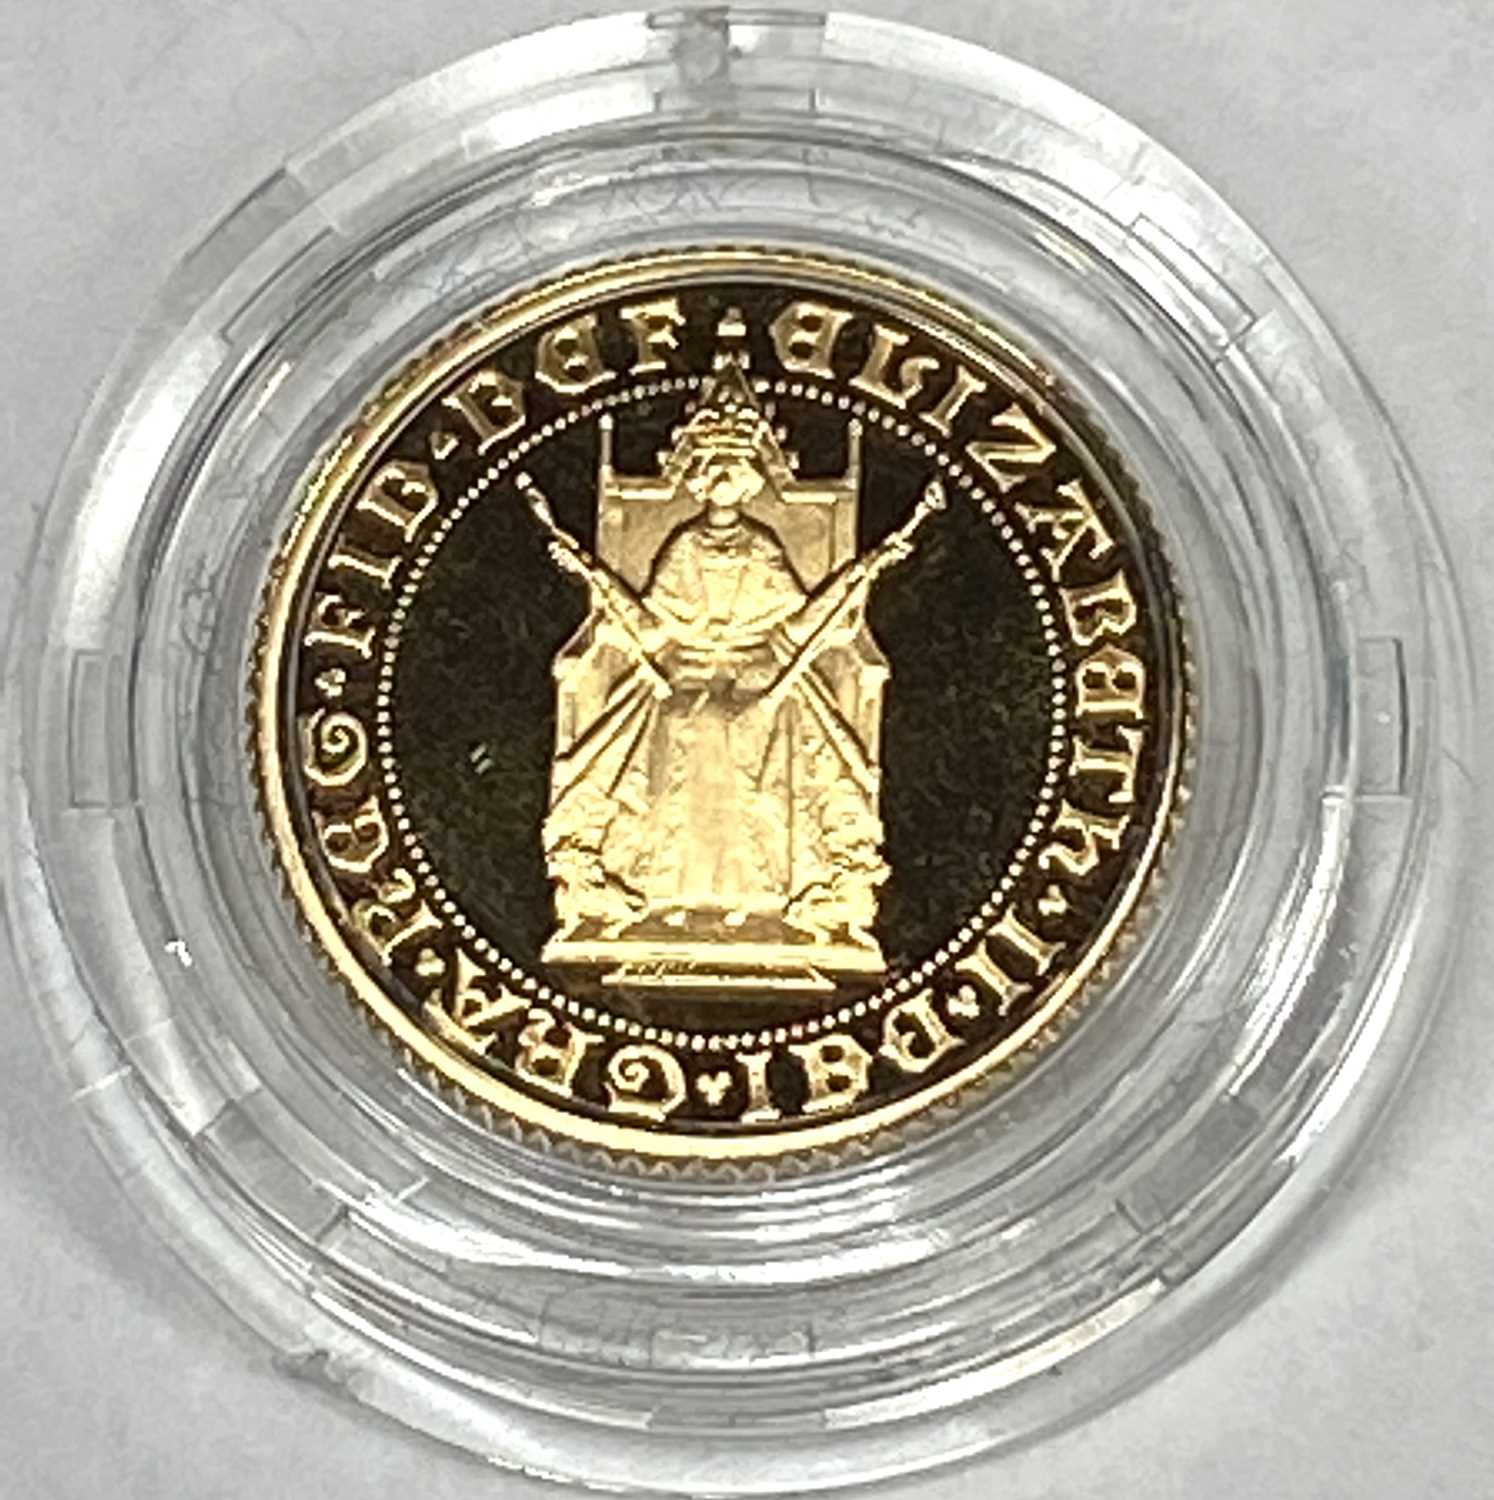 ELIZABETH II 1989 PROOF HALF SOVEREIGN 500TH ANNIVERSARY OF THE FIRST GOLD SOVEREIGN 1489-1989 -